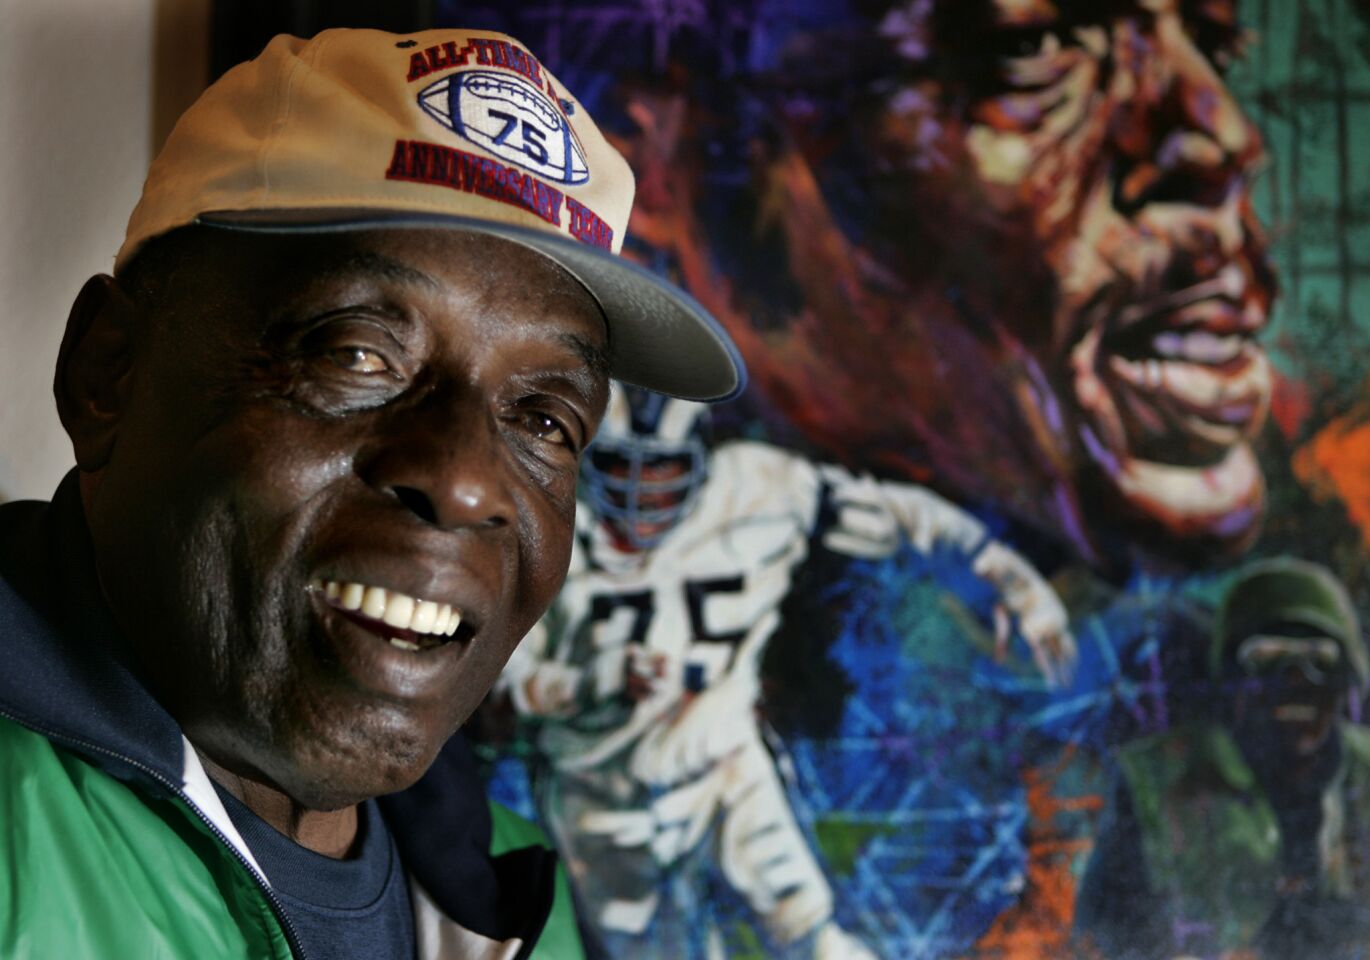 The Hall of Fame football player was one of the Los Angeles Rams' heralded Fearsome Foursome whose outspoken persona and relentless pursuit of quarterbacks helped turn defensive linemen into stars. He is credited with coining the term "sack" for how he knocked down quarterbacks. He was 74. Full obituary Notable deaths of 2012